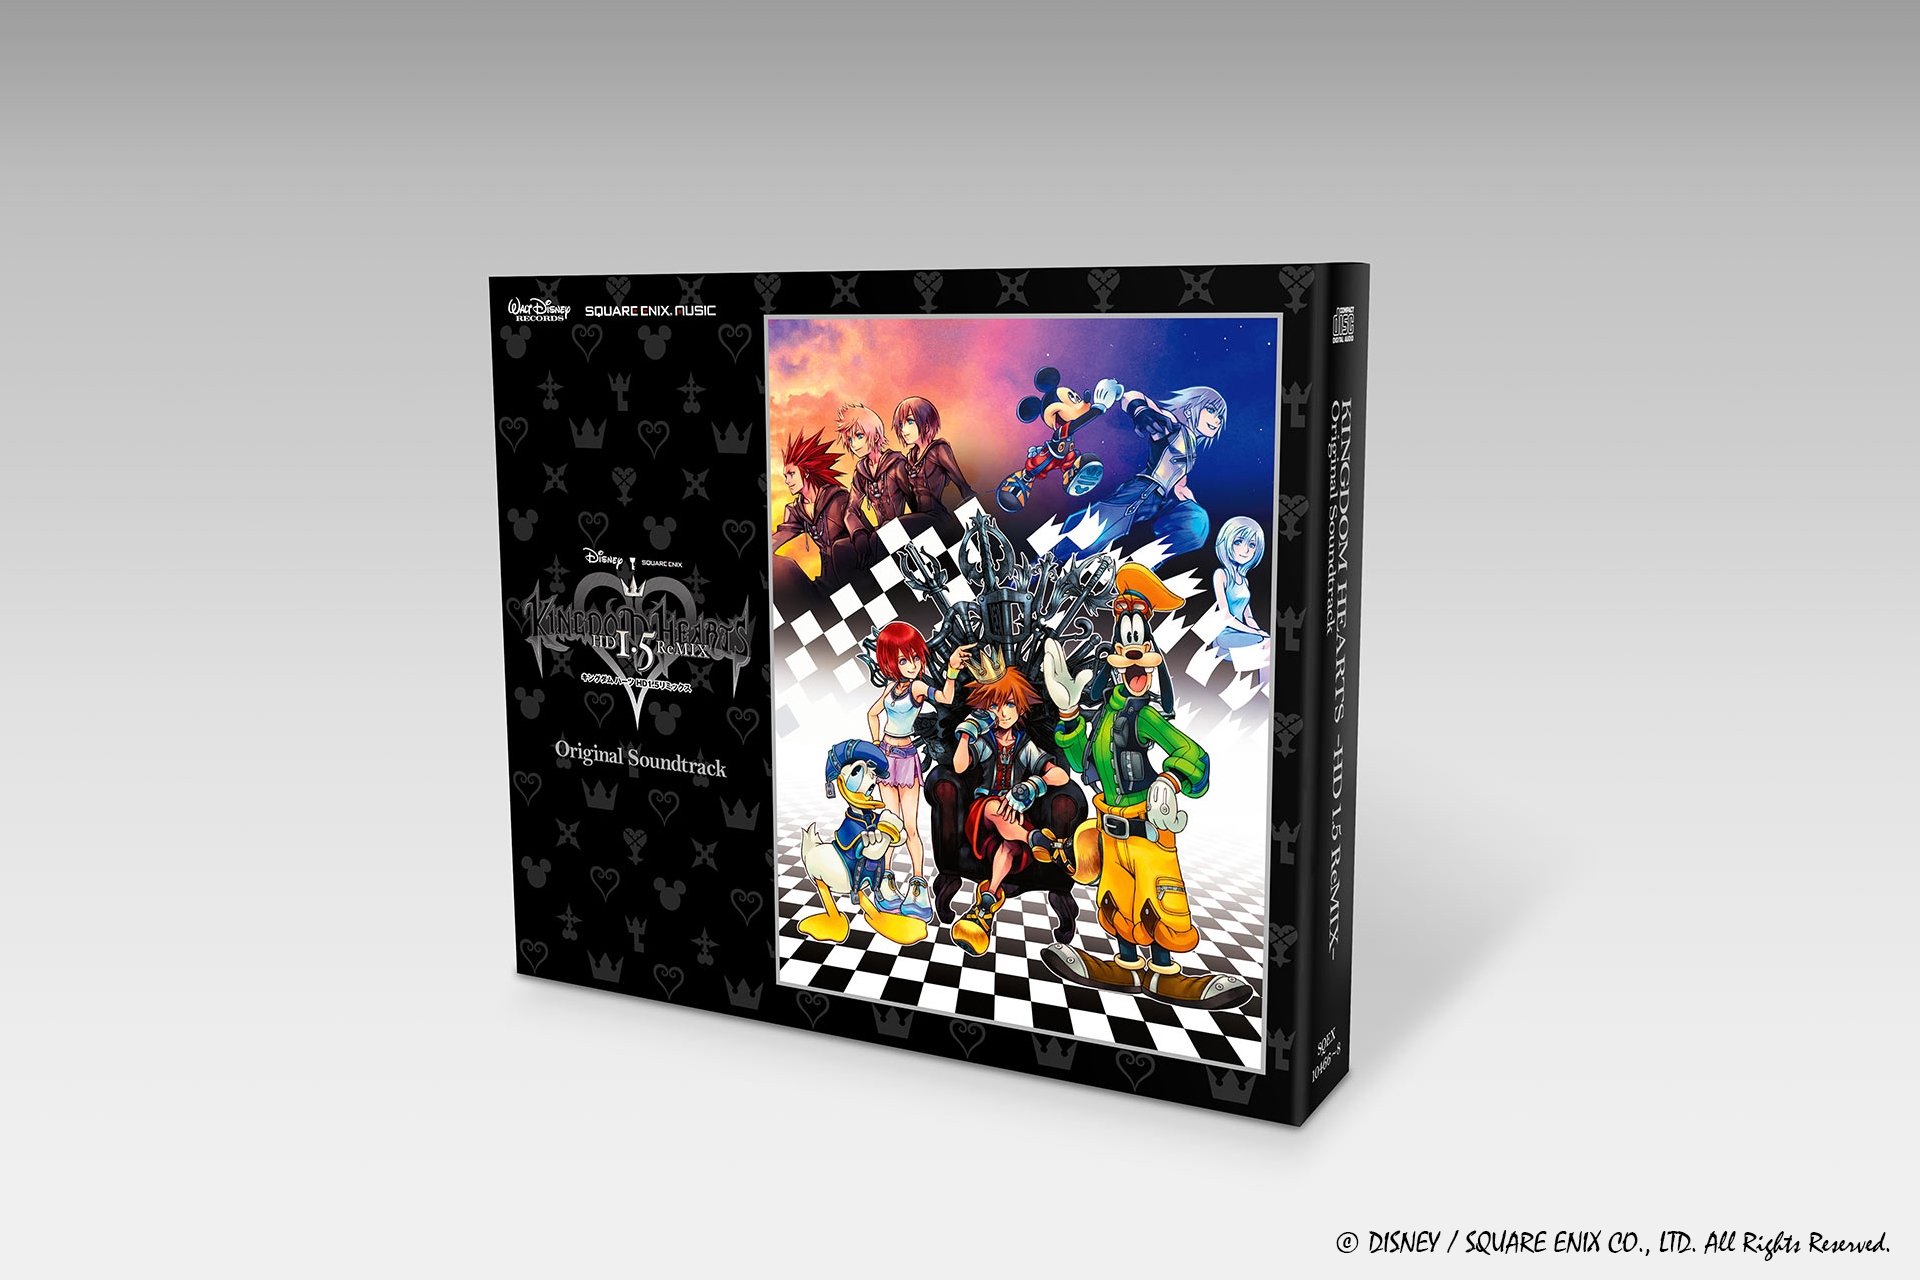 download kingdom hearts 1.5 and 2.5 for free